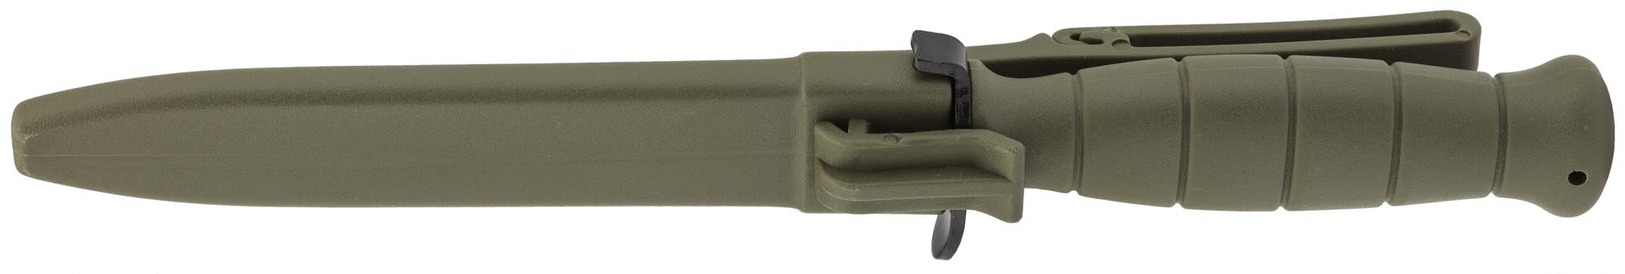 COUTEAU DE COMBAT TASK OD GREEN LC9985807 - Armes Blanches